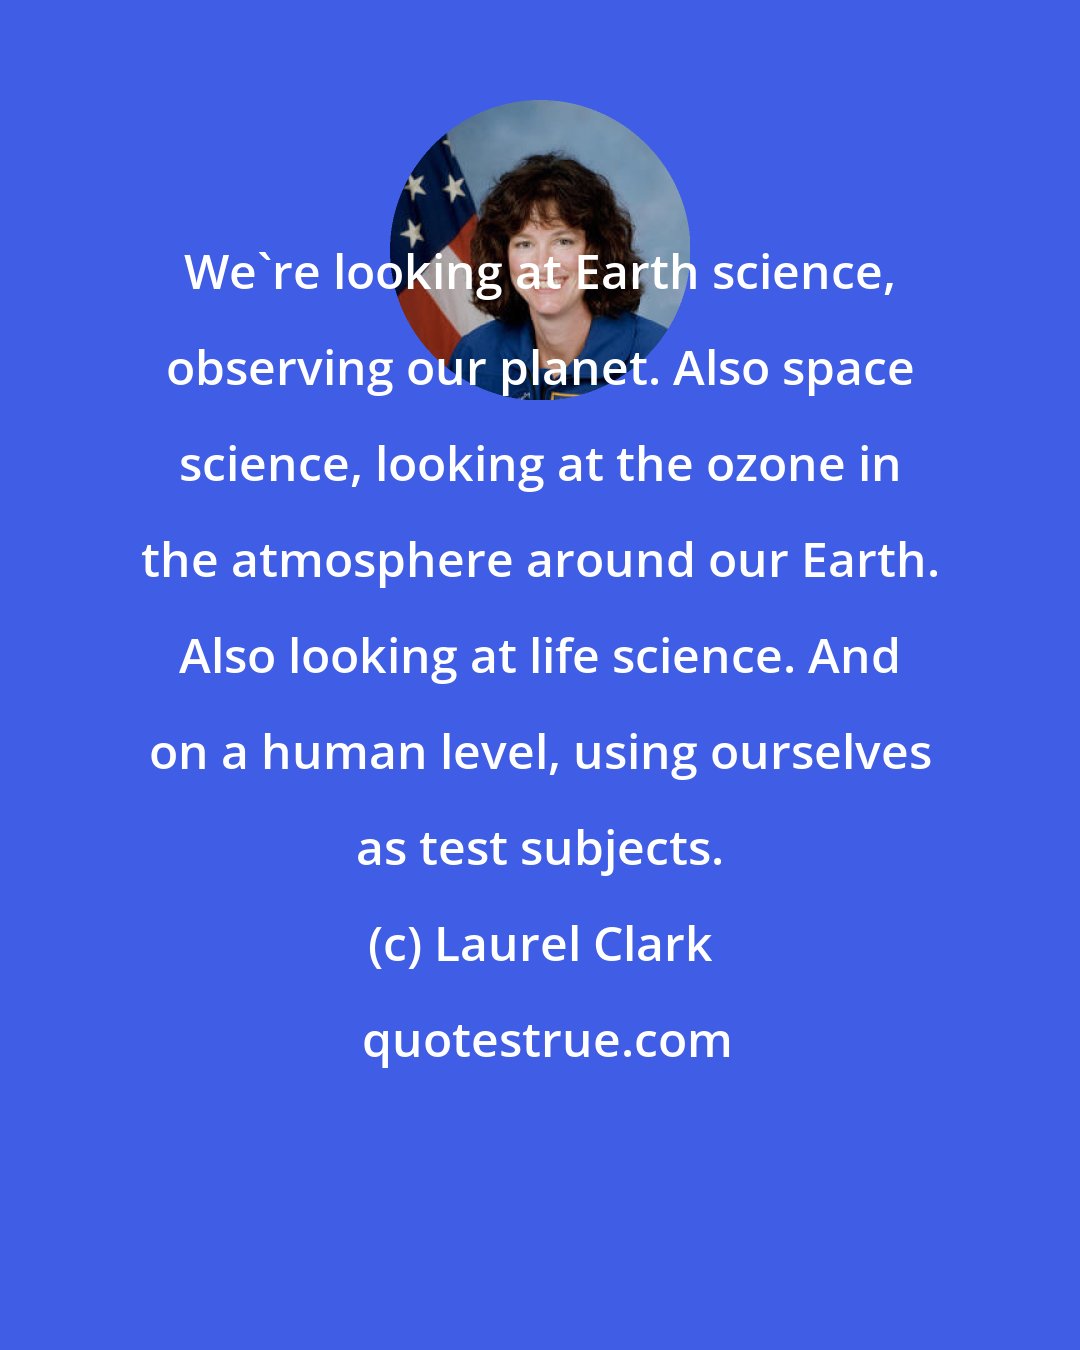 Laurel Clark: We're looking at Earth science, observing our planet. Also space science, looking at the ozone in the atmosphere around our Earth. Also looking at life science. And on a human level, using ourselves as test subjects.